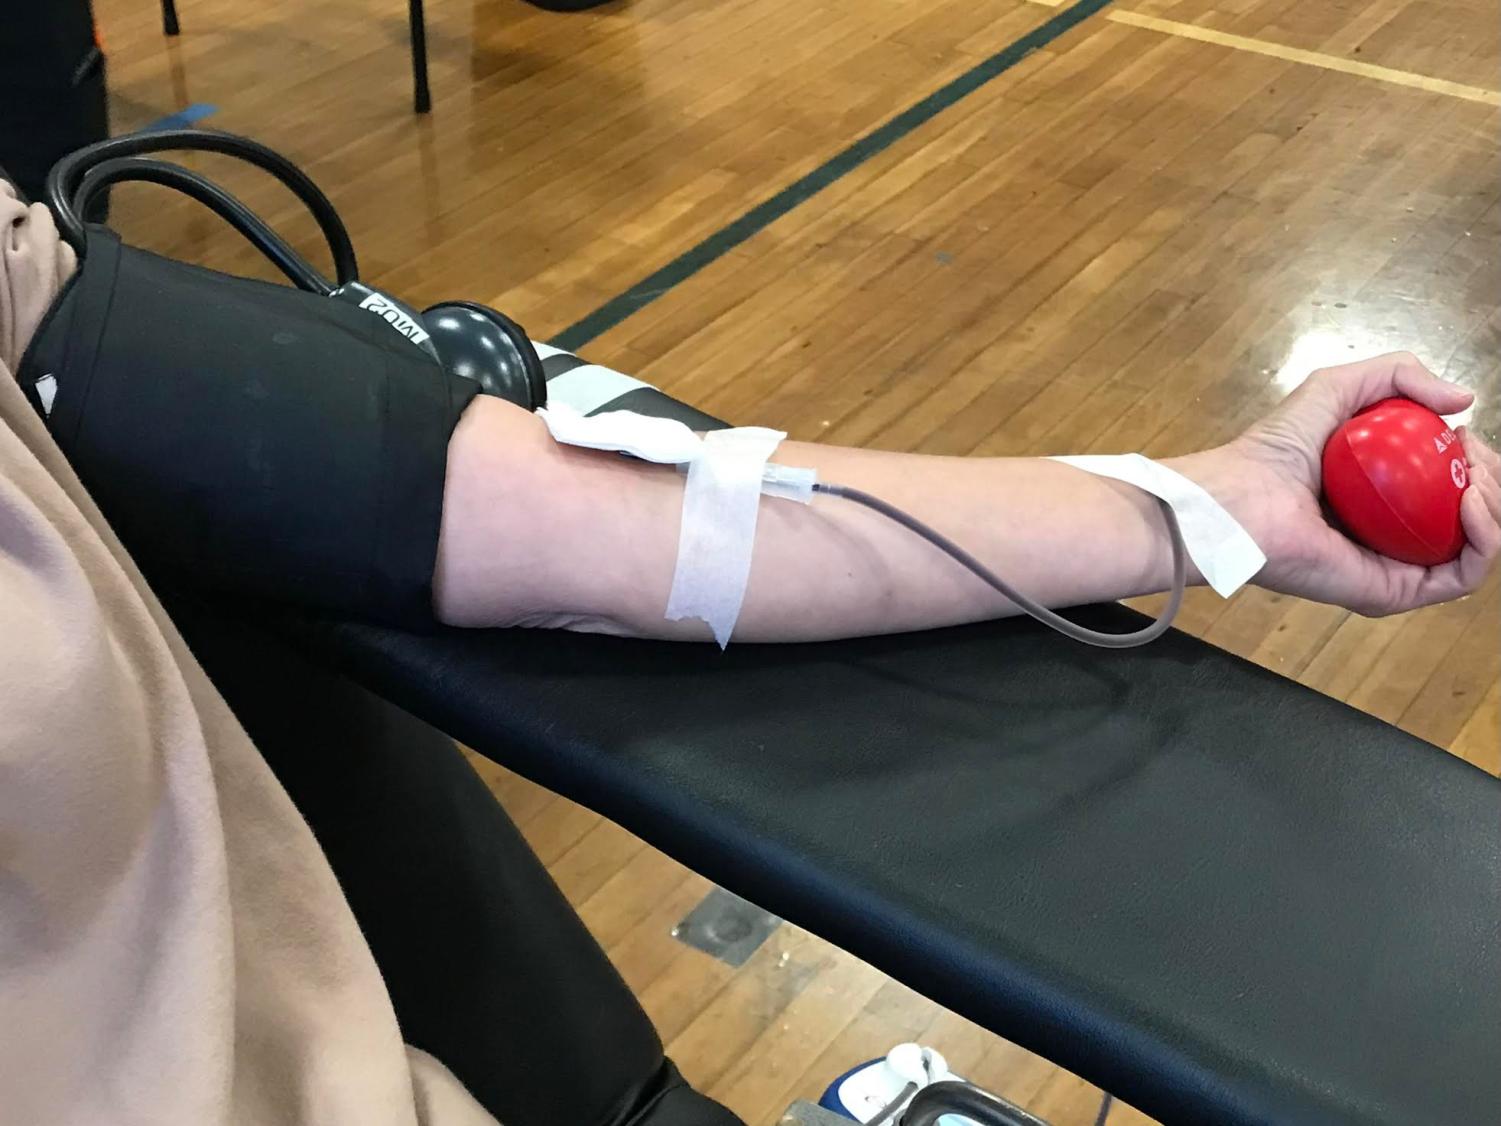 American+Red+Cross+brings+blood+drive+to+Amador+during+national+blood+shortage